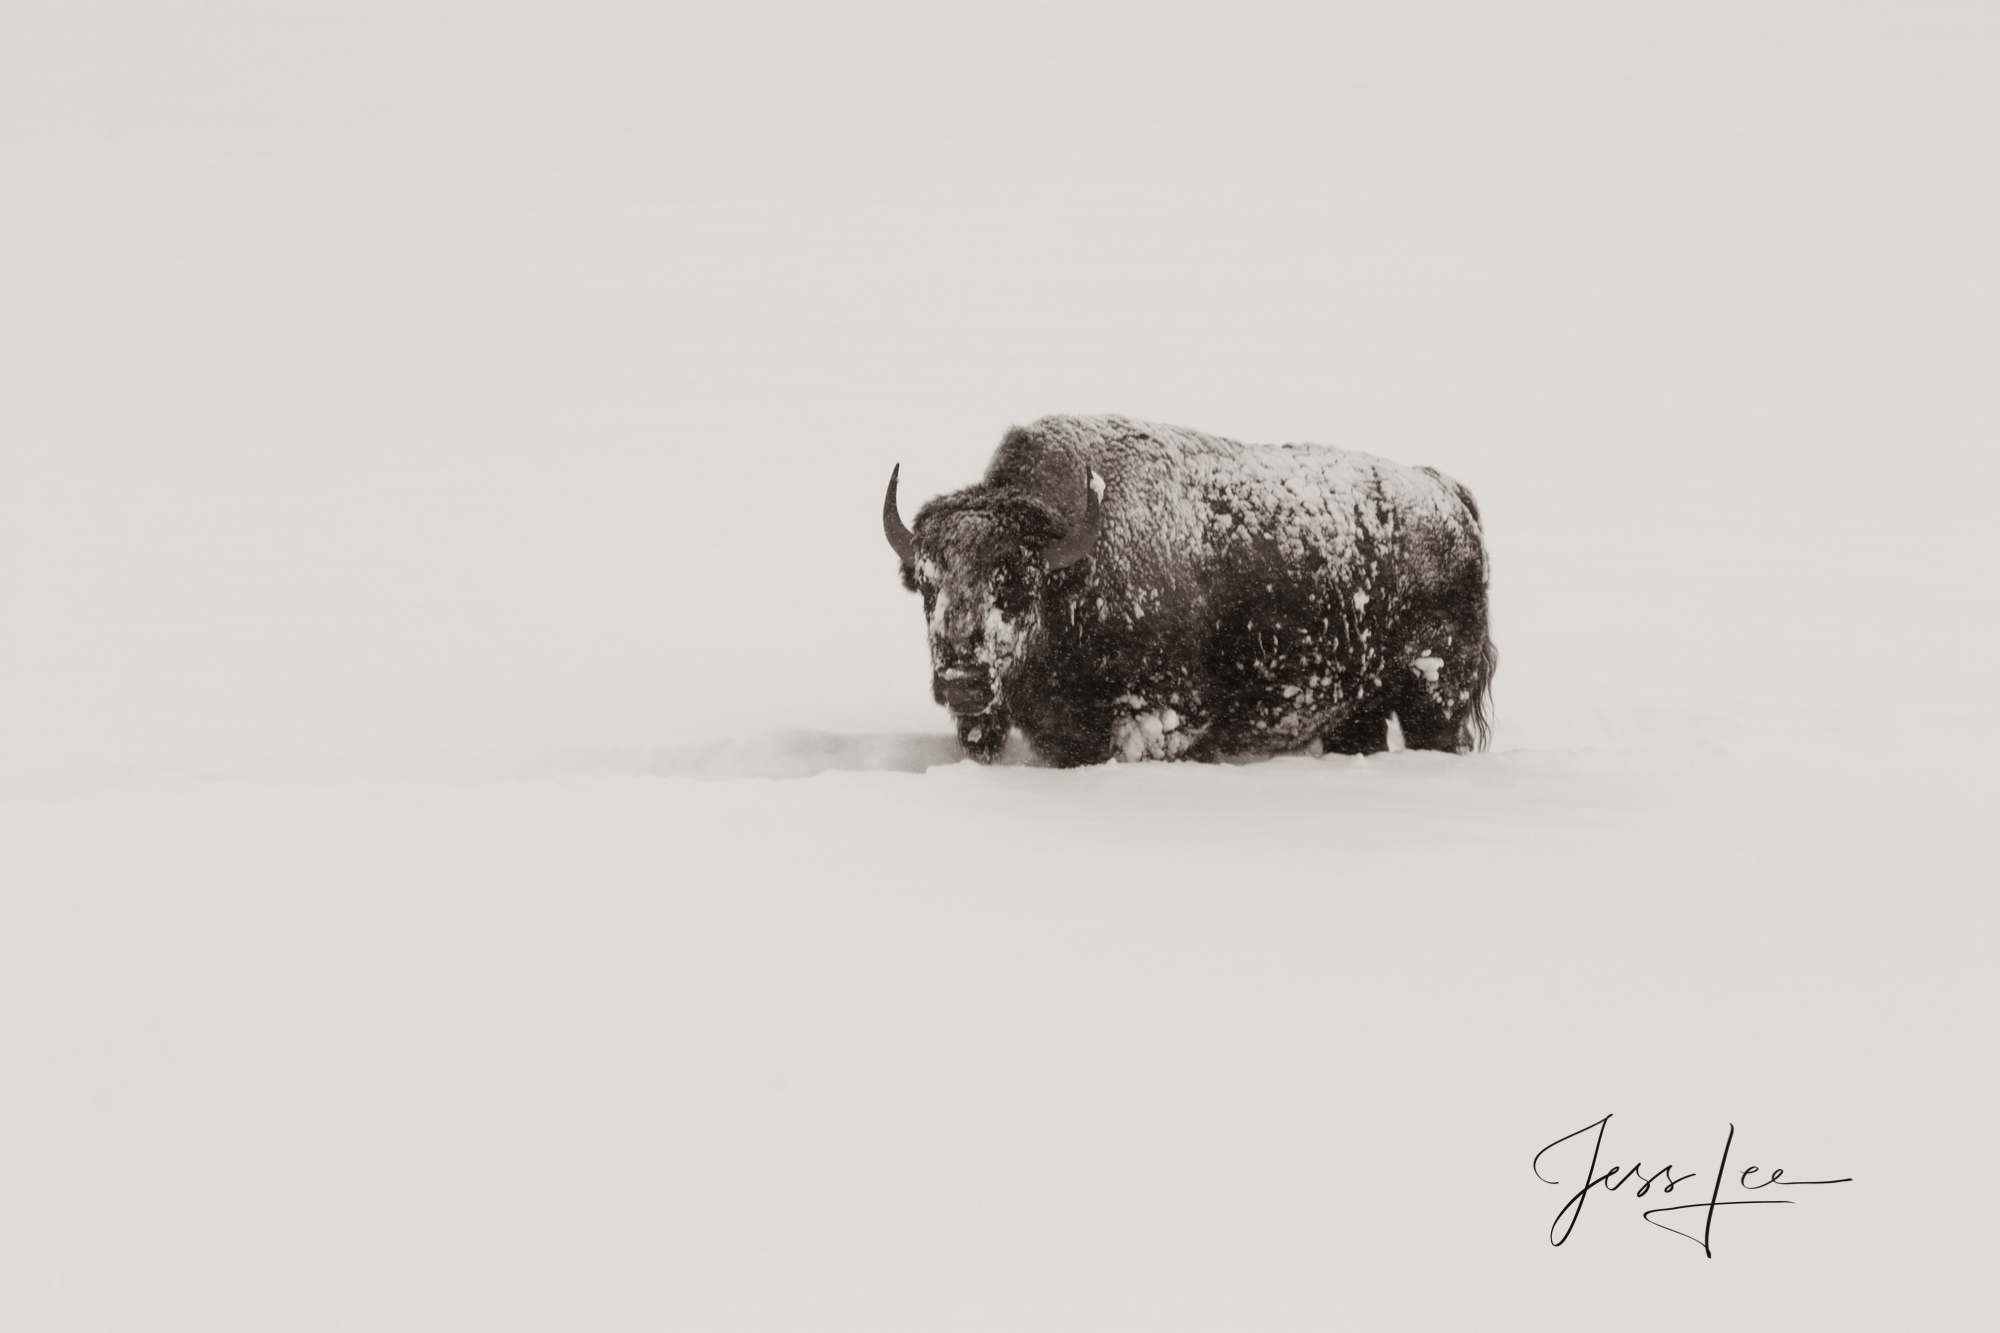 Yellowstone Bison or American Buffalo.. A Limited Edition of 800 Prints. These Lone Bull Bison fine art wildlife photographs...